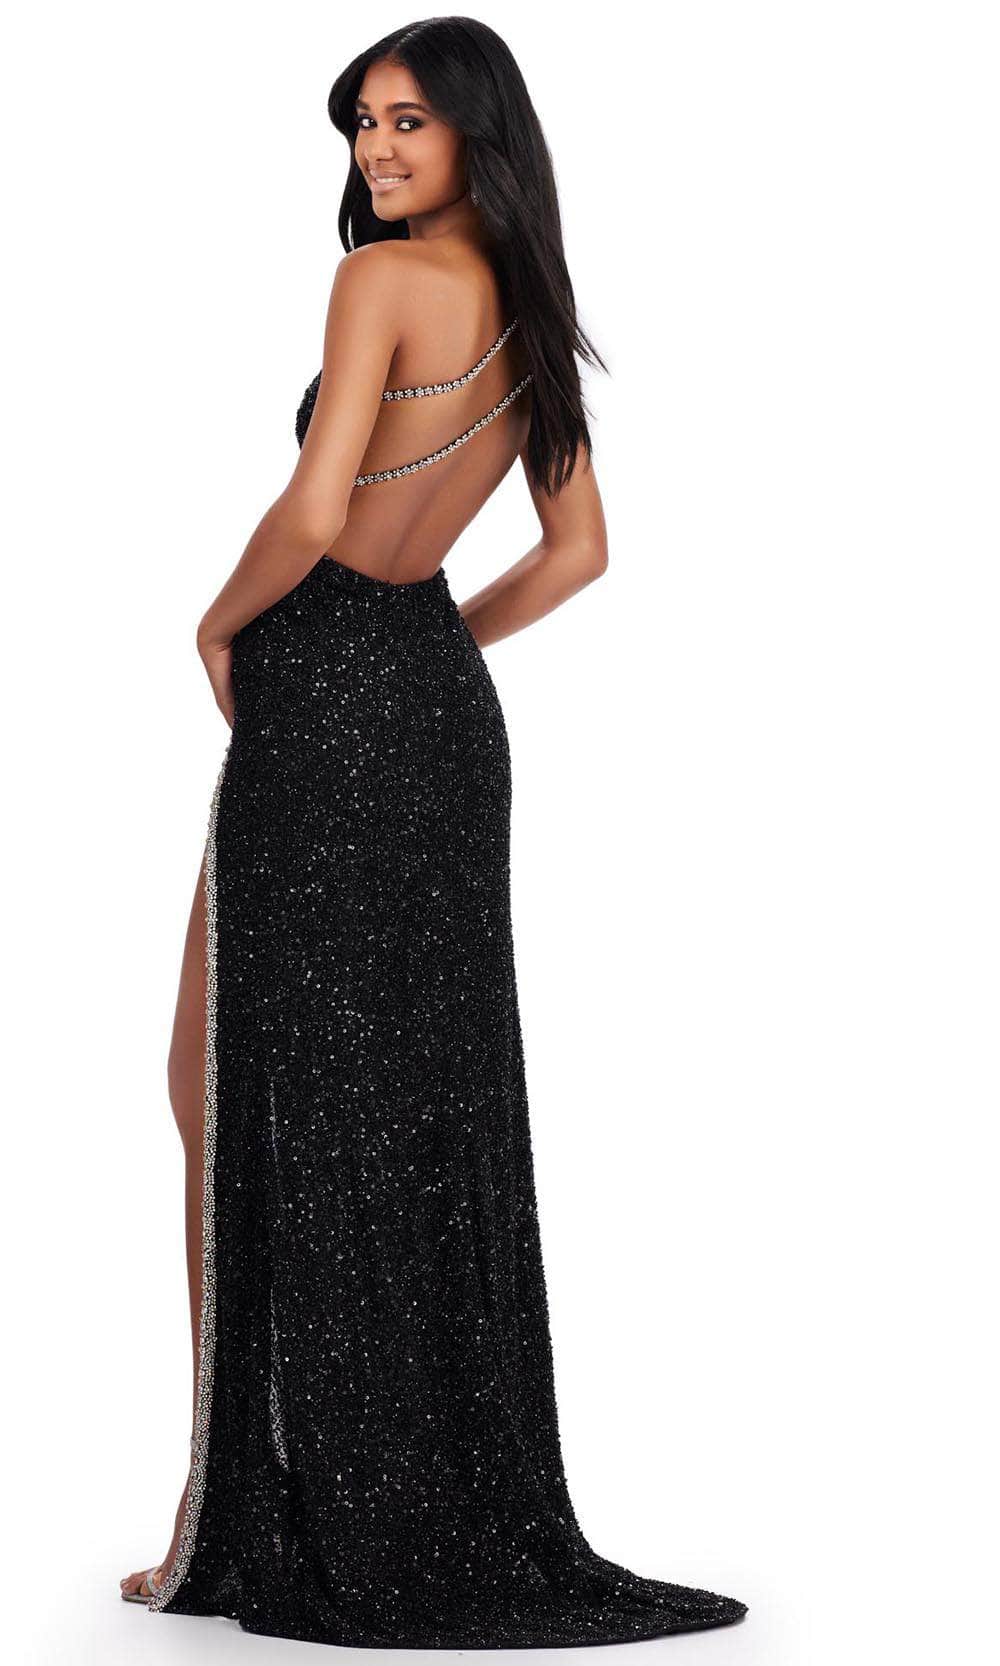 Ashley Lauren 11635 - Strappy Open Back Prom Gown Evening Dresses